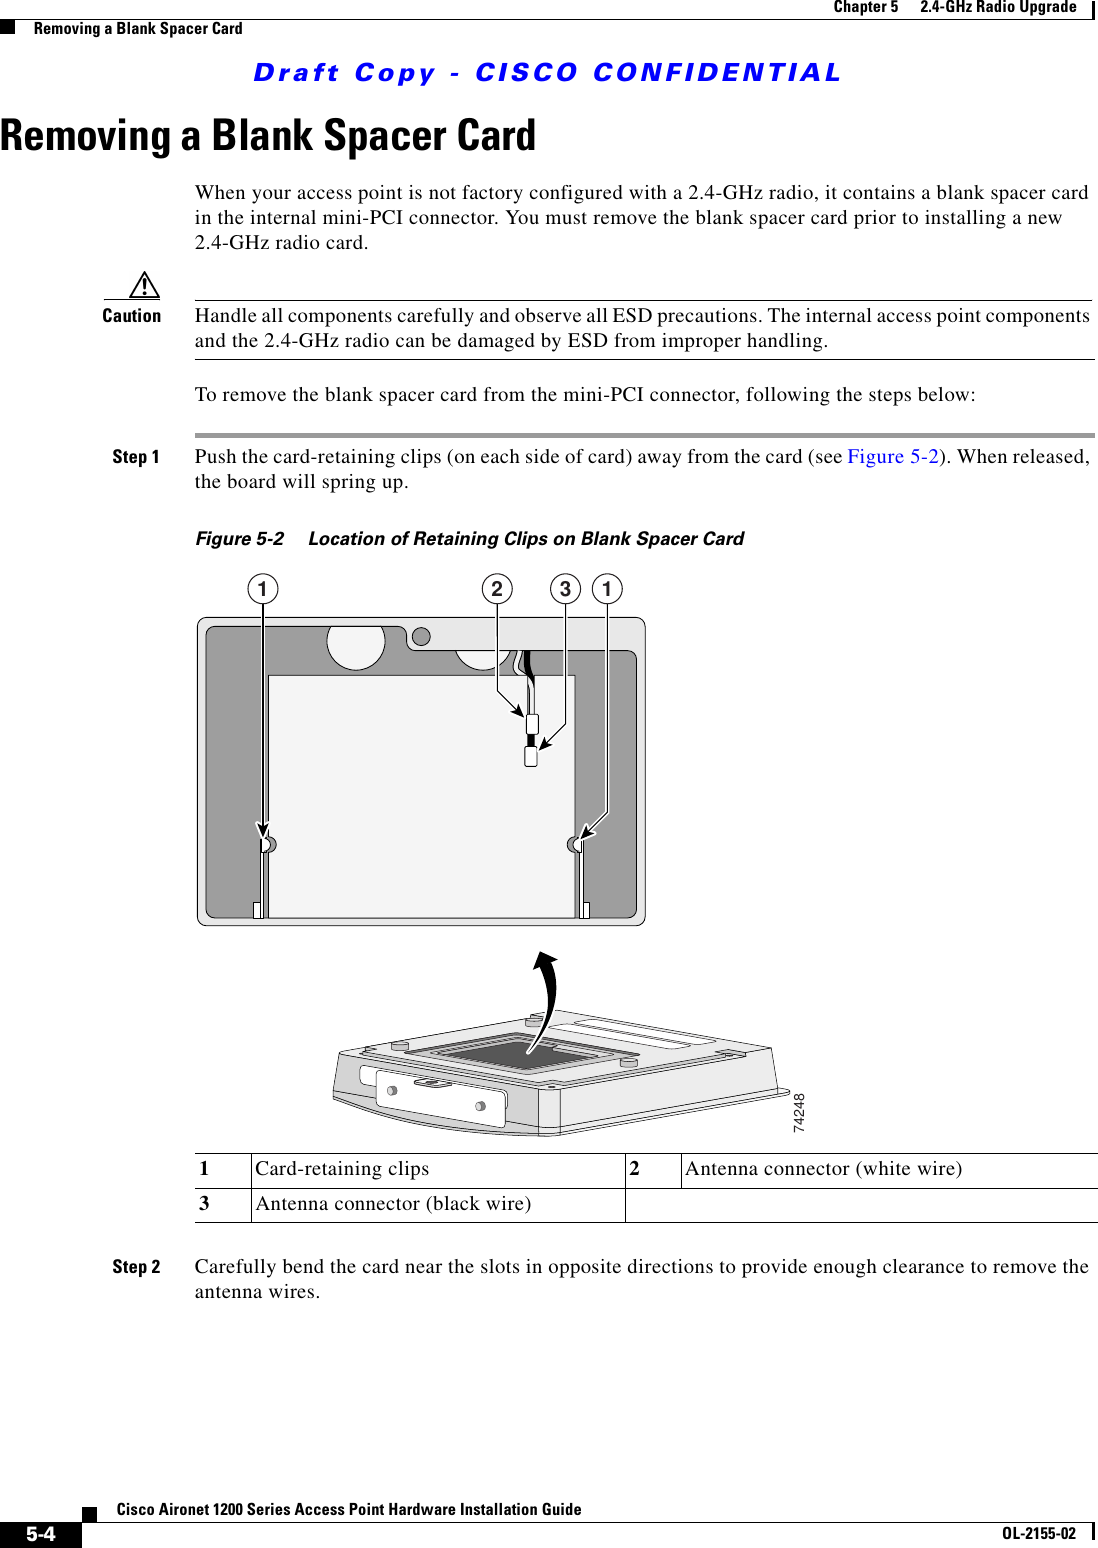 Draft Copy - CISCO CONFIDENTIAL 5-4Cisco Aironet 1200 Series Access Point Hardware Installation GuideOL-2155-02Chapter 5      2.4-GHz Radio UpgradeRemoving a Blank Spacer CardRemoving a Blank Spacer CardWhen your access point is not factory configured with a 2.4-GHz radio, it contains a blank spacer card in the internal mini-PCI connector. You must remove the blank spacer card prior to installing a new 2.4-GHz radio card.Caution Handle all components carefully and observe all ESD precautions. The internal access point components and the 2.4-GHz radio can be damaged by ESD from improper handling. To remove the blank spacer card from the mini-PCI connector, following the steps below:Step 1 Push the card-retaining clips (on each side of card) away from the card (see Figure 5-2). When released, the board will spring up.Figure 5-2 Location of Retaining Clips on Blank Spacer CardStep 2 Carefully bend the card near the slots in opposite directions to provide enough clearance to remove the antenna wires.1Card-retaining clips 2Antenna connector (white wire)3Antenna connector (black wire)742481 3 12